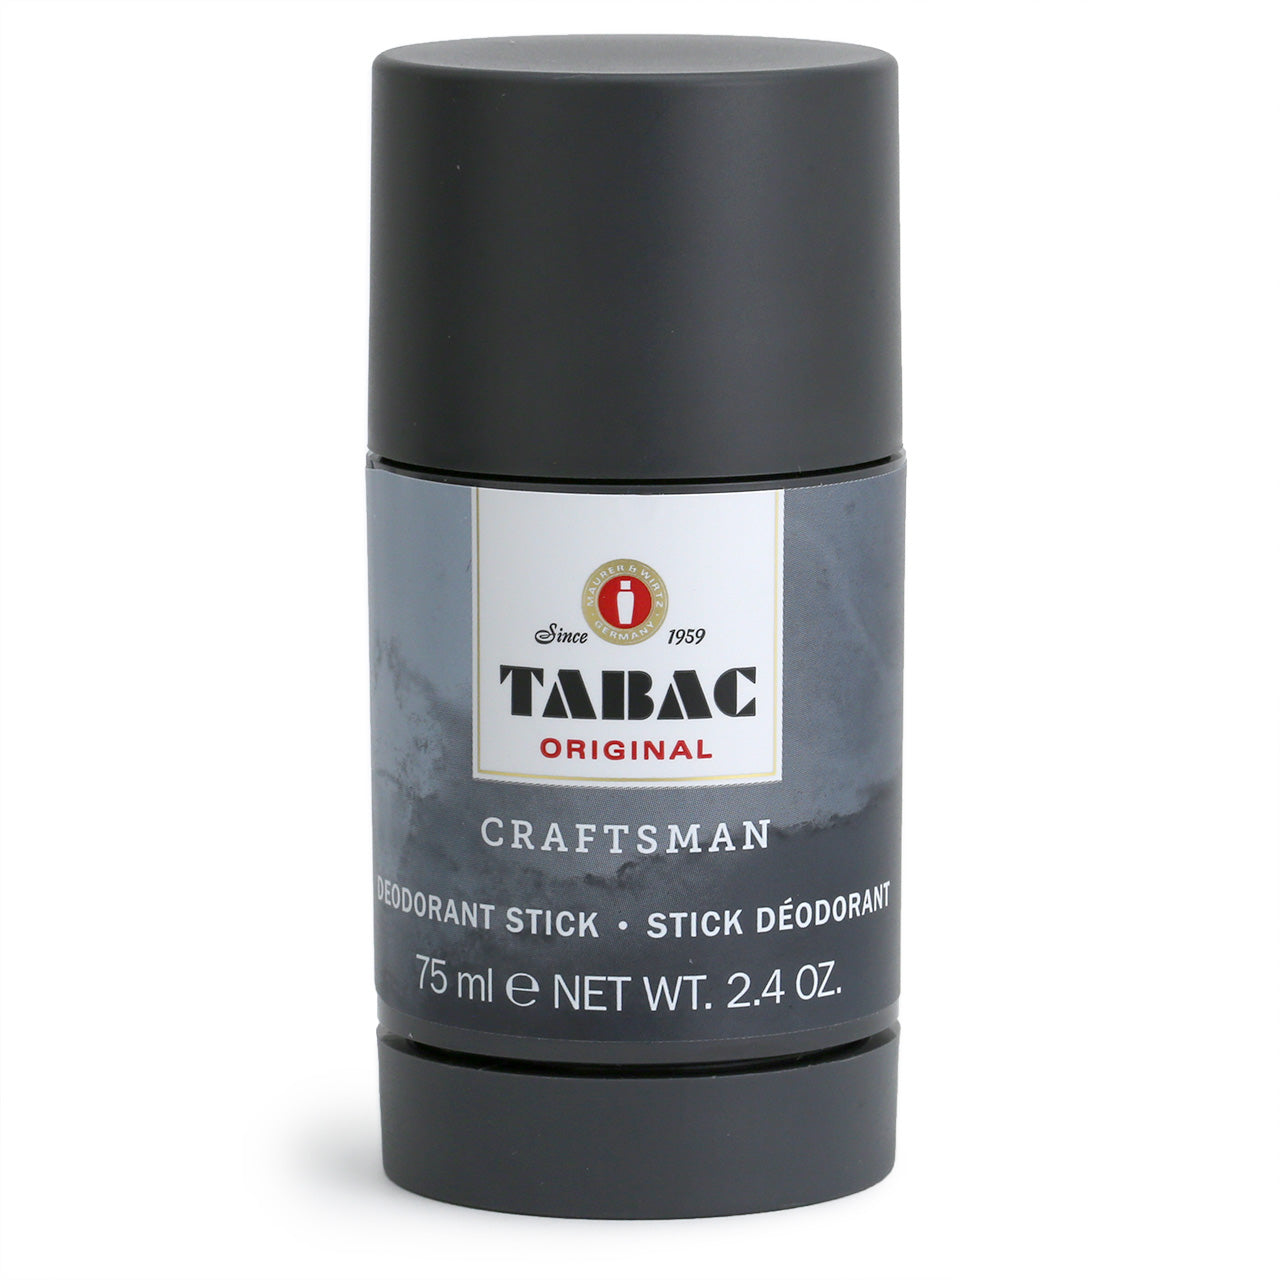 Tabac Craftsman deodorant stick in a grey retractable tube container